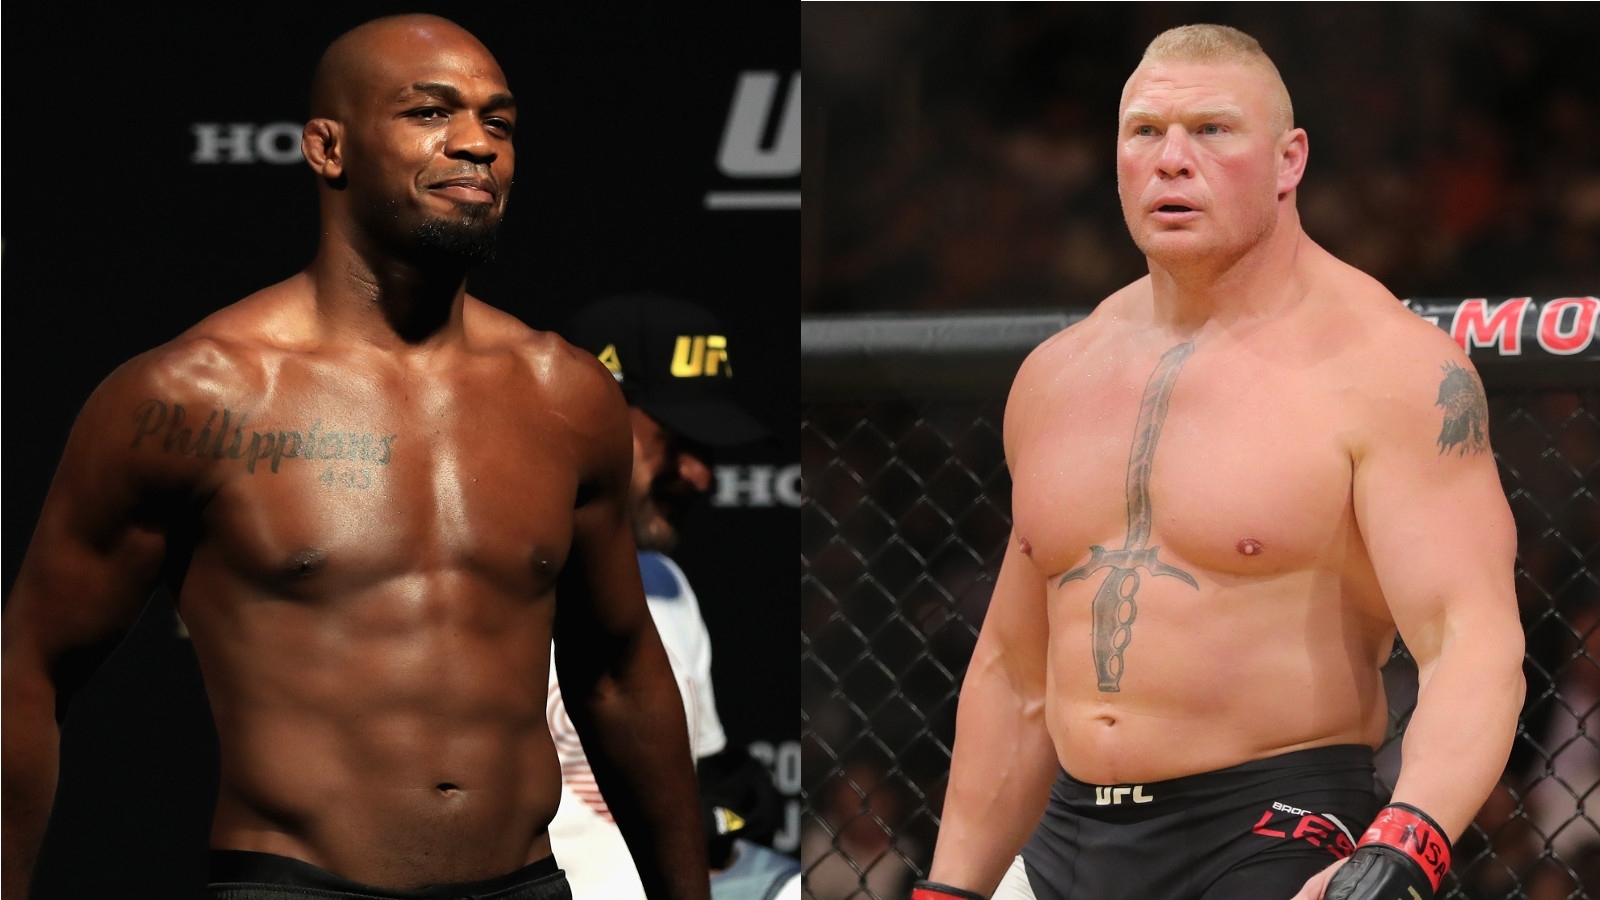 Fight with Brock Lesnar is comparable to Mayweather vs McGregor says Jon Jones